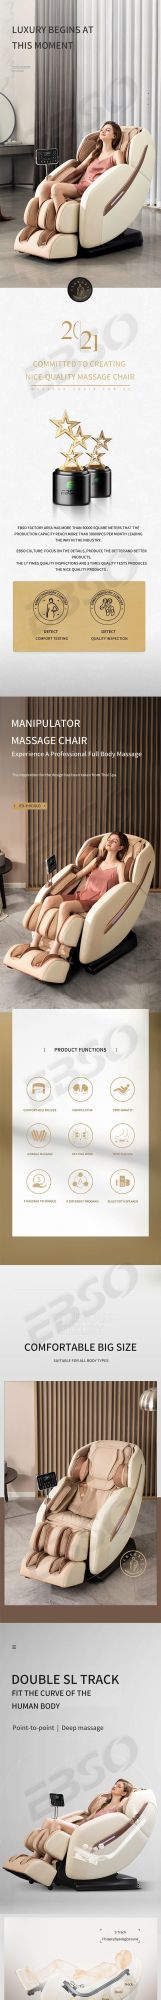 2021 Full Body Durable Factory Luxury Cheap Low Price Massage Chair